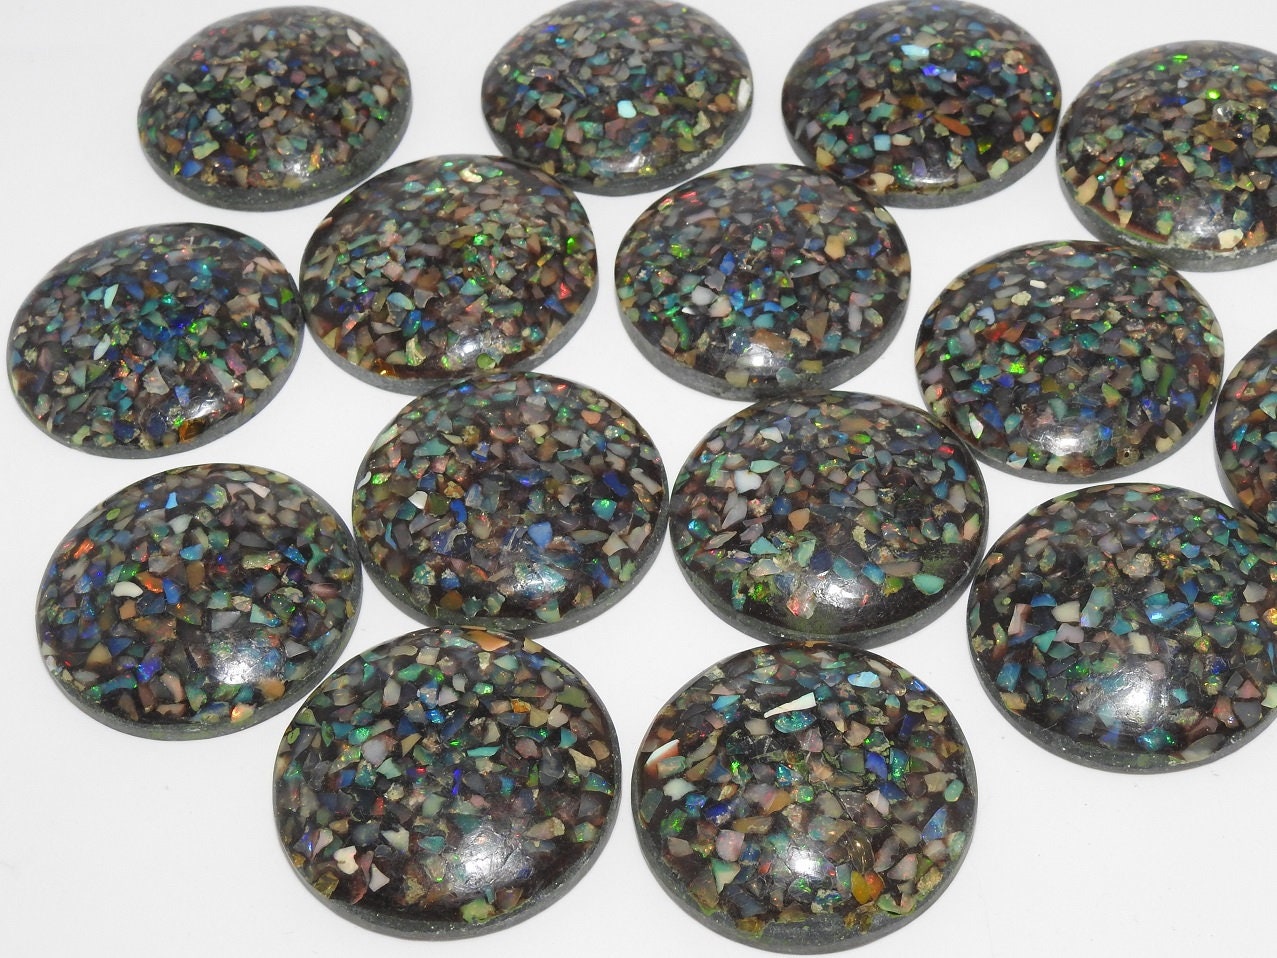 Ethiopian Black Opal Smooth Round Shape Cabochon,Multi Flashy Fire,Stabilized Gemstone,Loose Stone,For Making Jewelry,37X37MM (wm)EO2 | Save 33% - Rajasthan Living 16